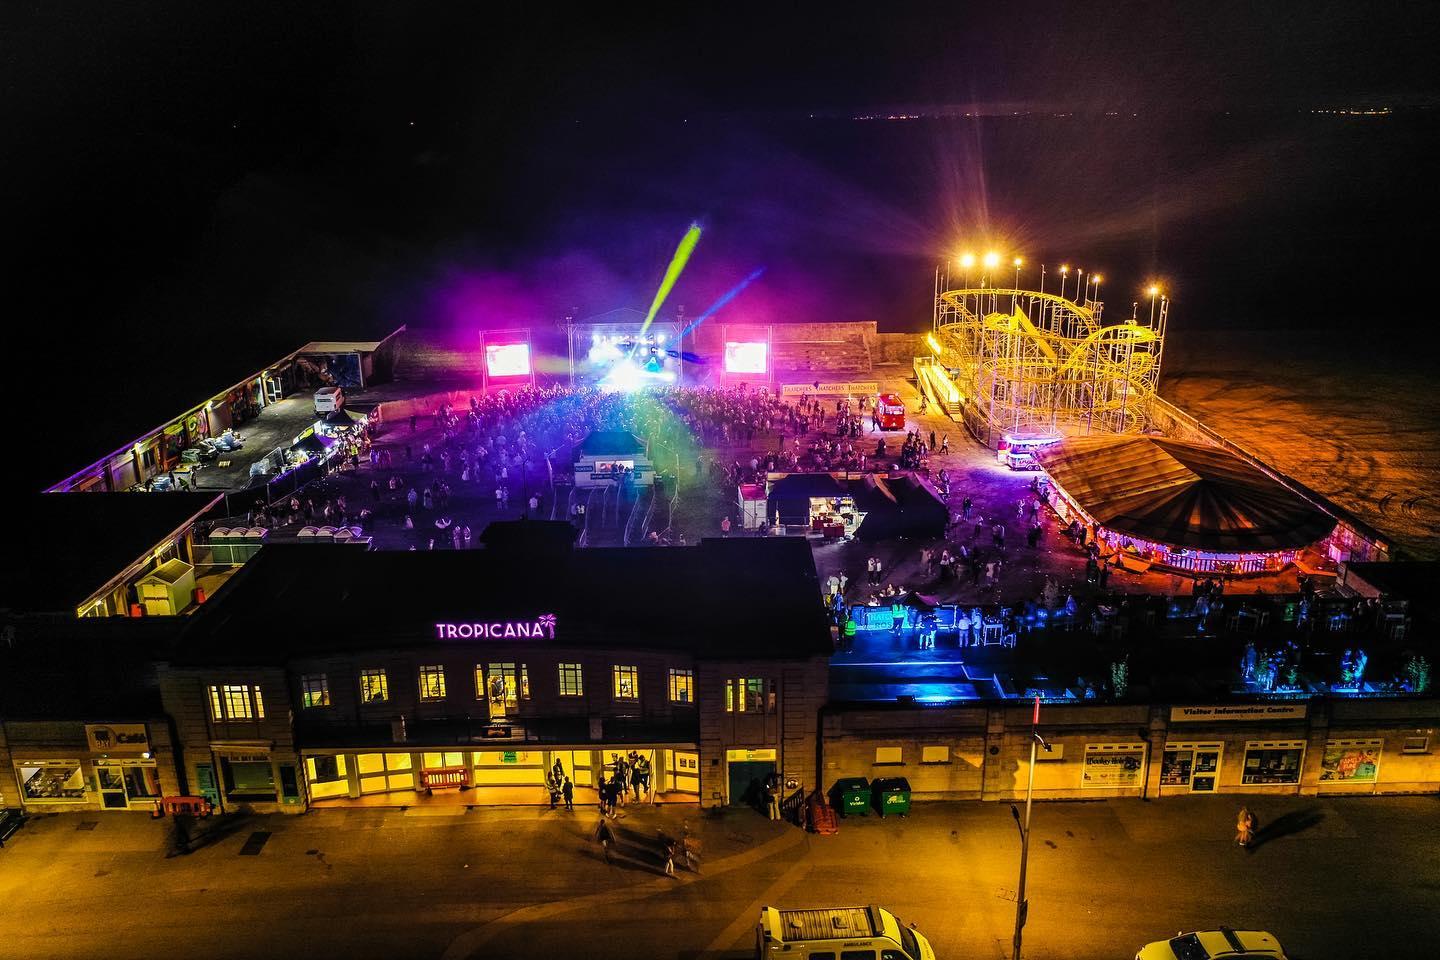 An aerial photo of the Tropicana taken at night while an event is taking place.